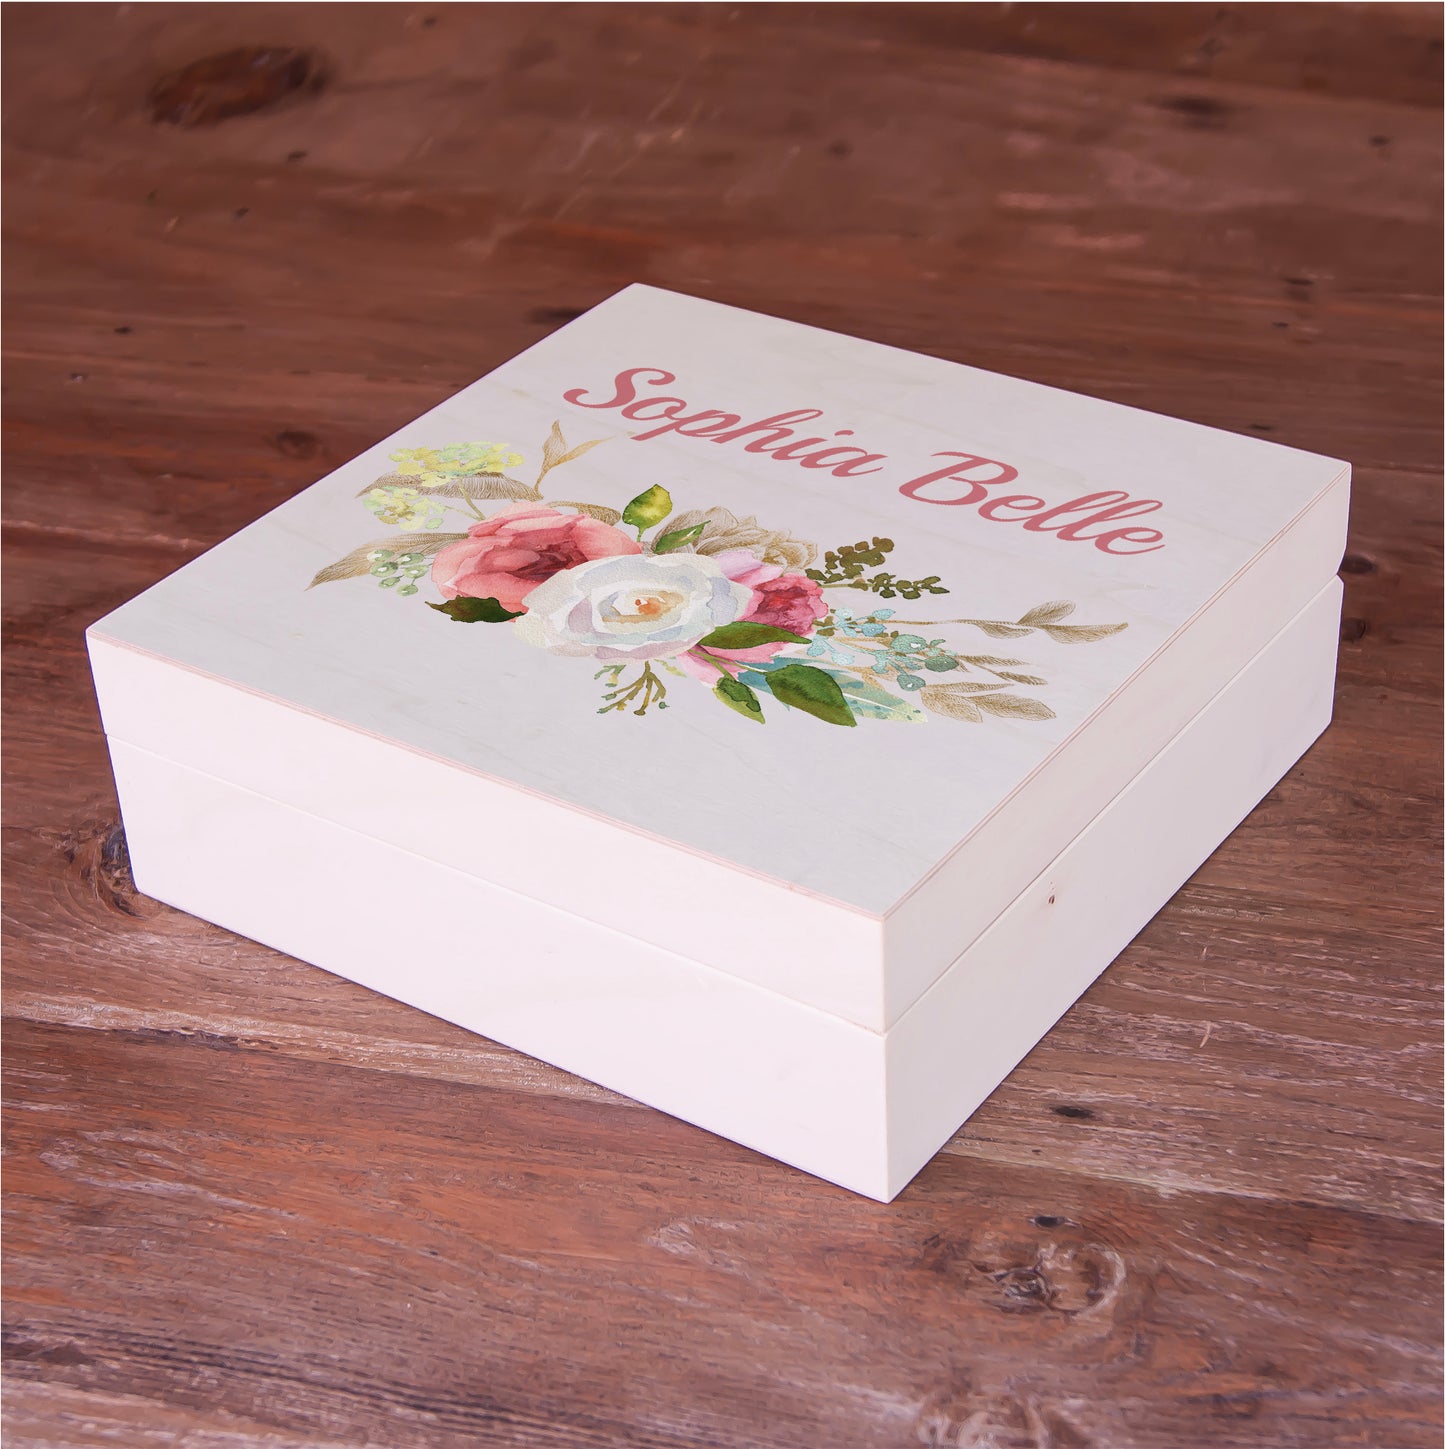 Wooden Memory Box for Baby Girl - Personalized Baby Name Gift - Floral Wreath Themed